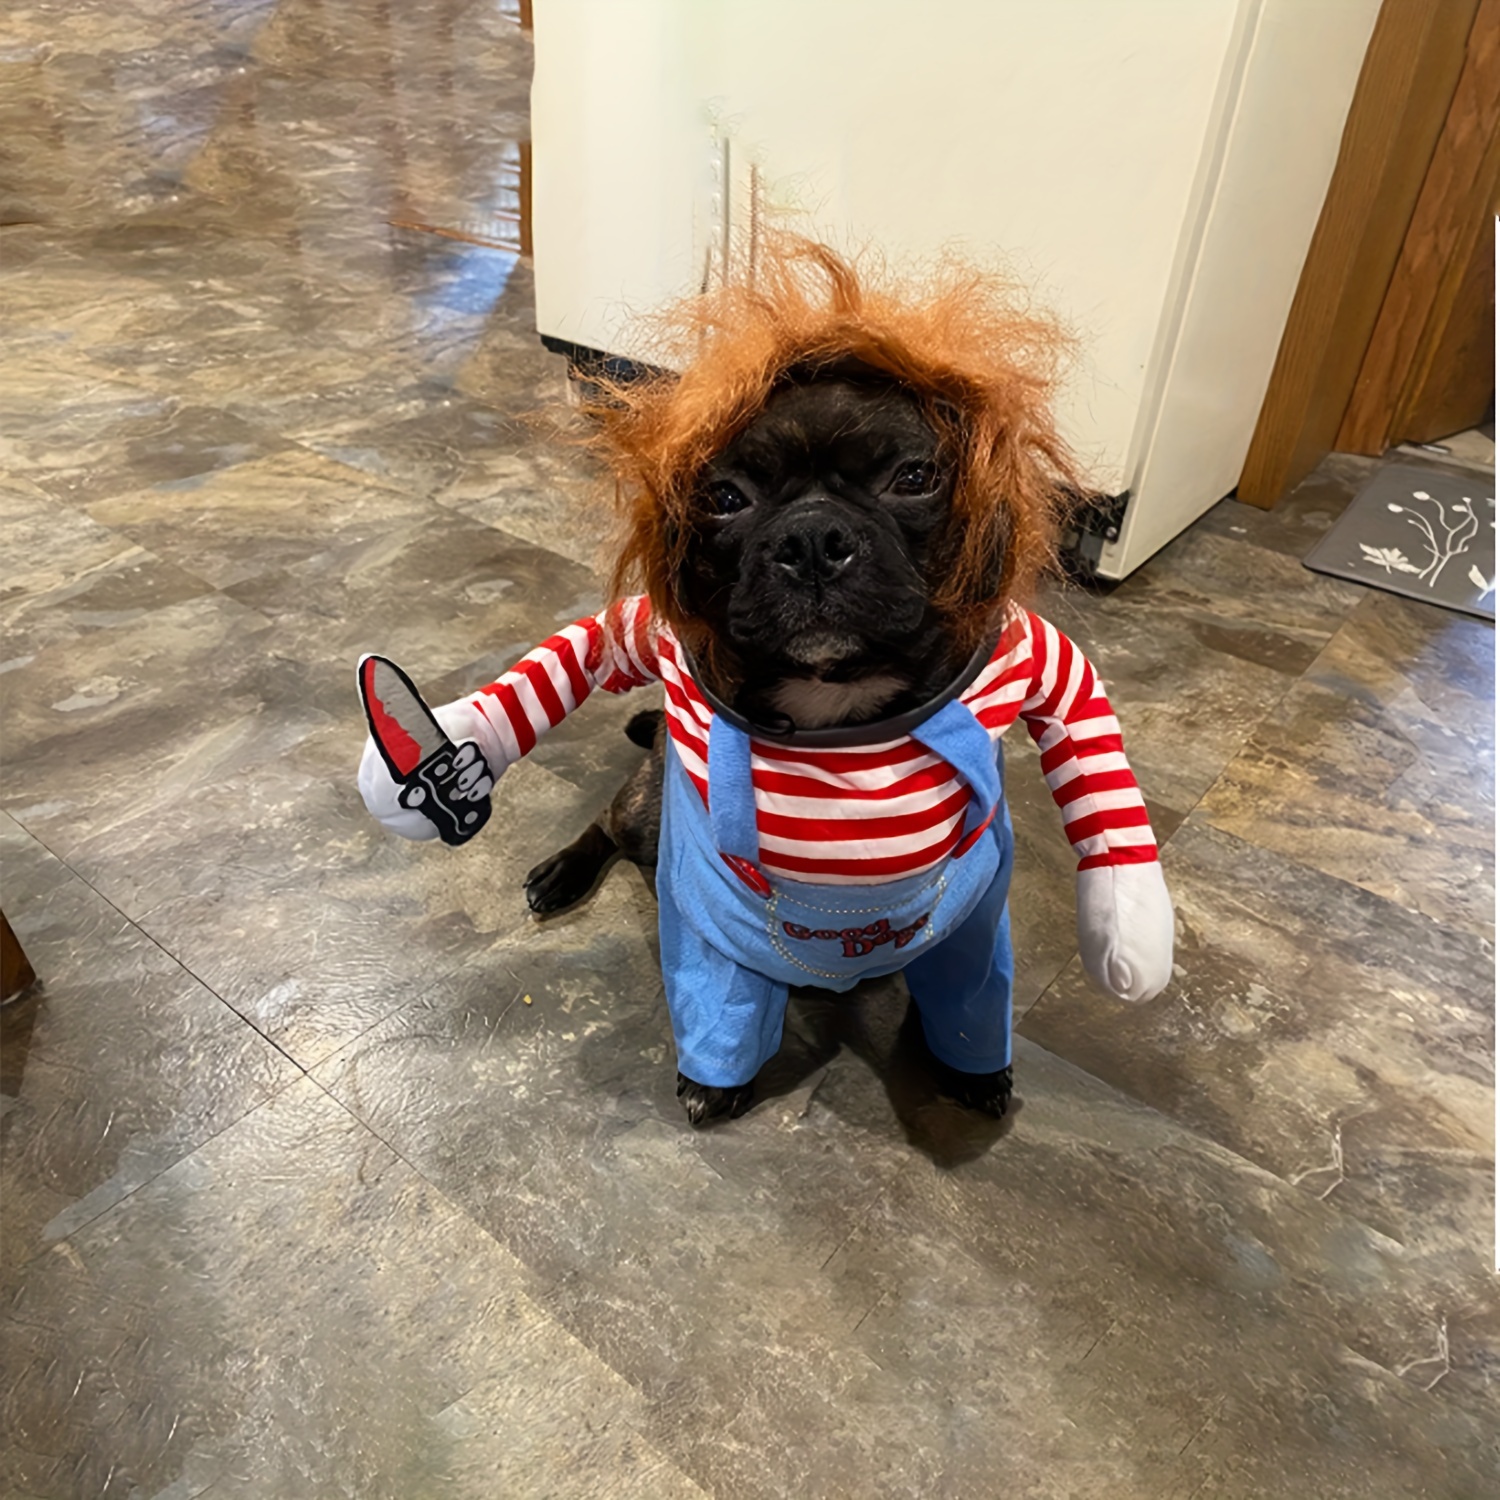 13 Pet Halloween Costumes That Are So Cute, It's Scary